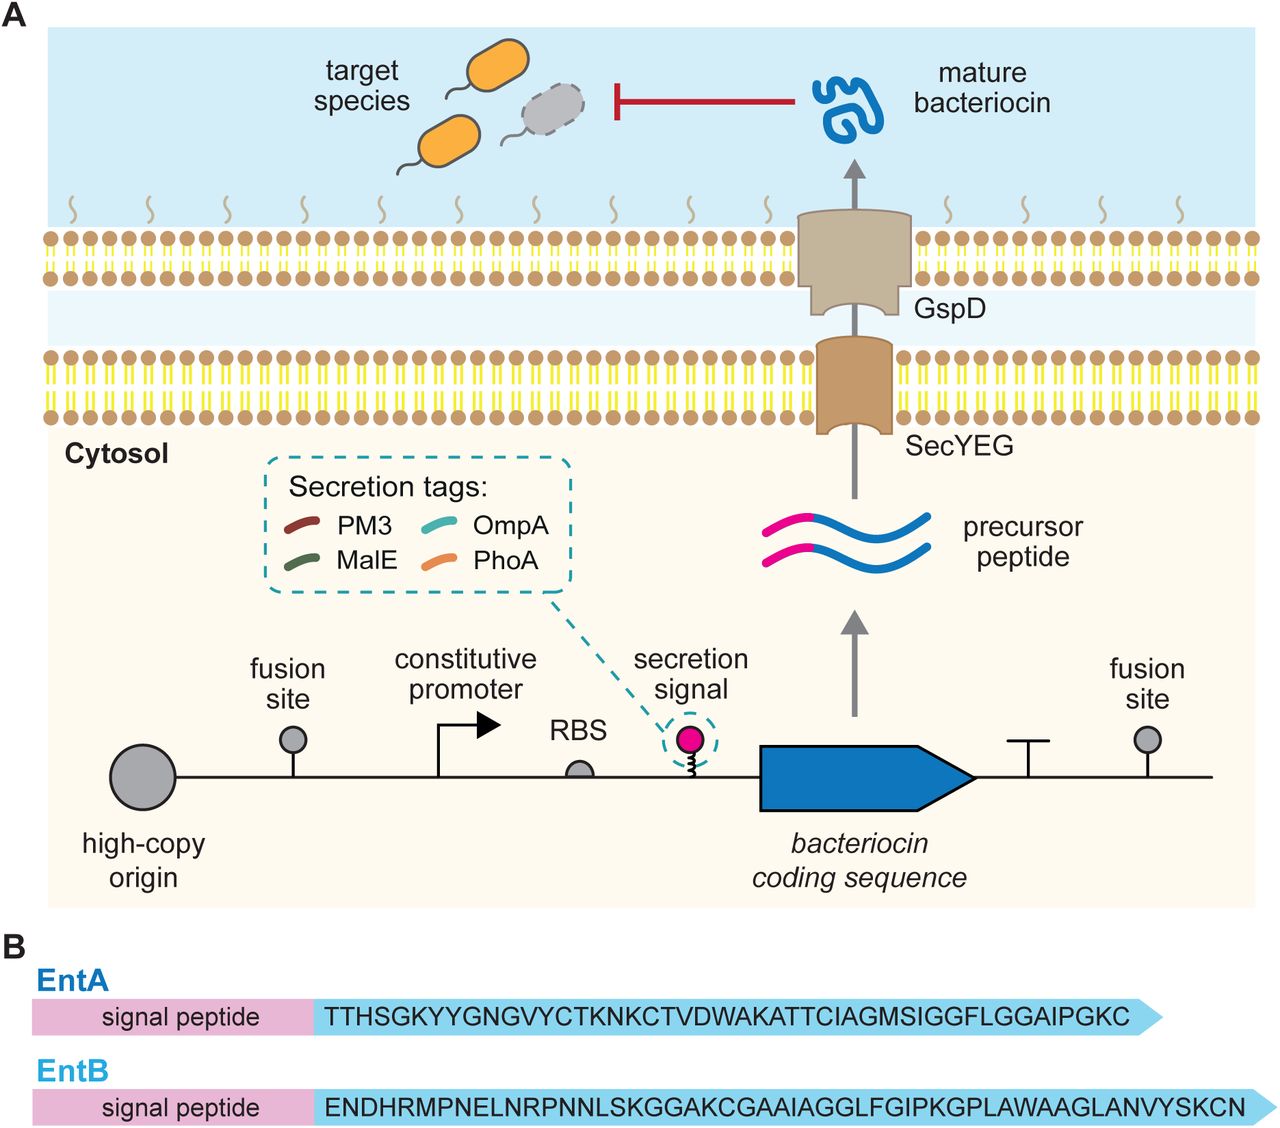 An antimicrobial peptide expression platform for targeting pathogenic bacterial species